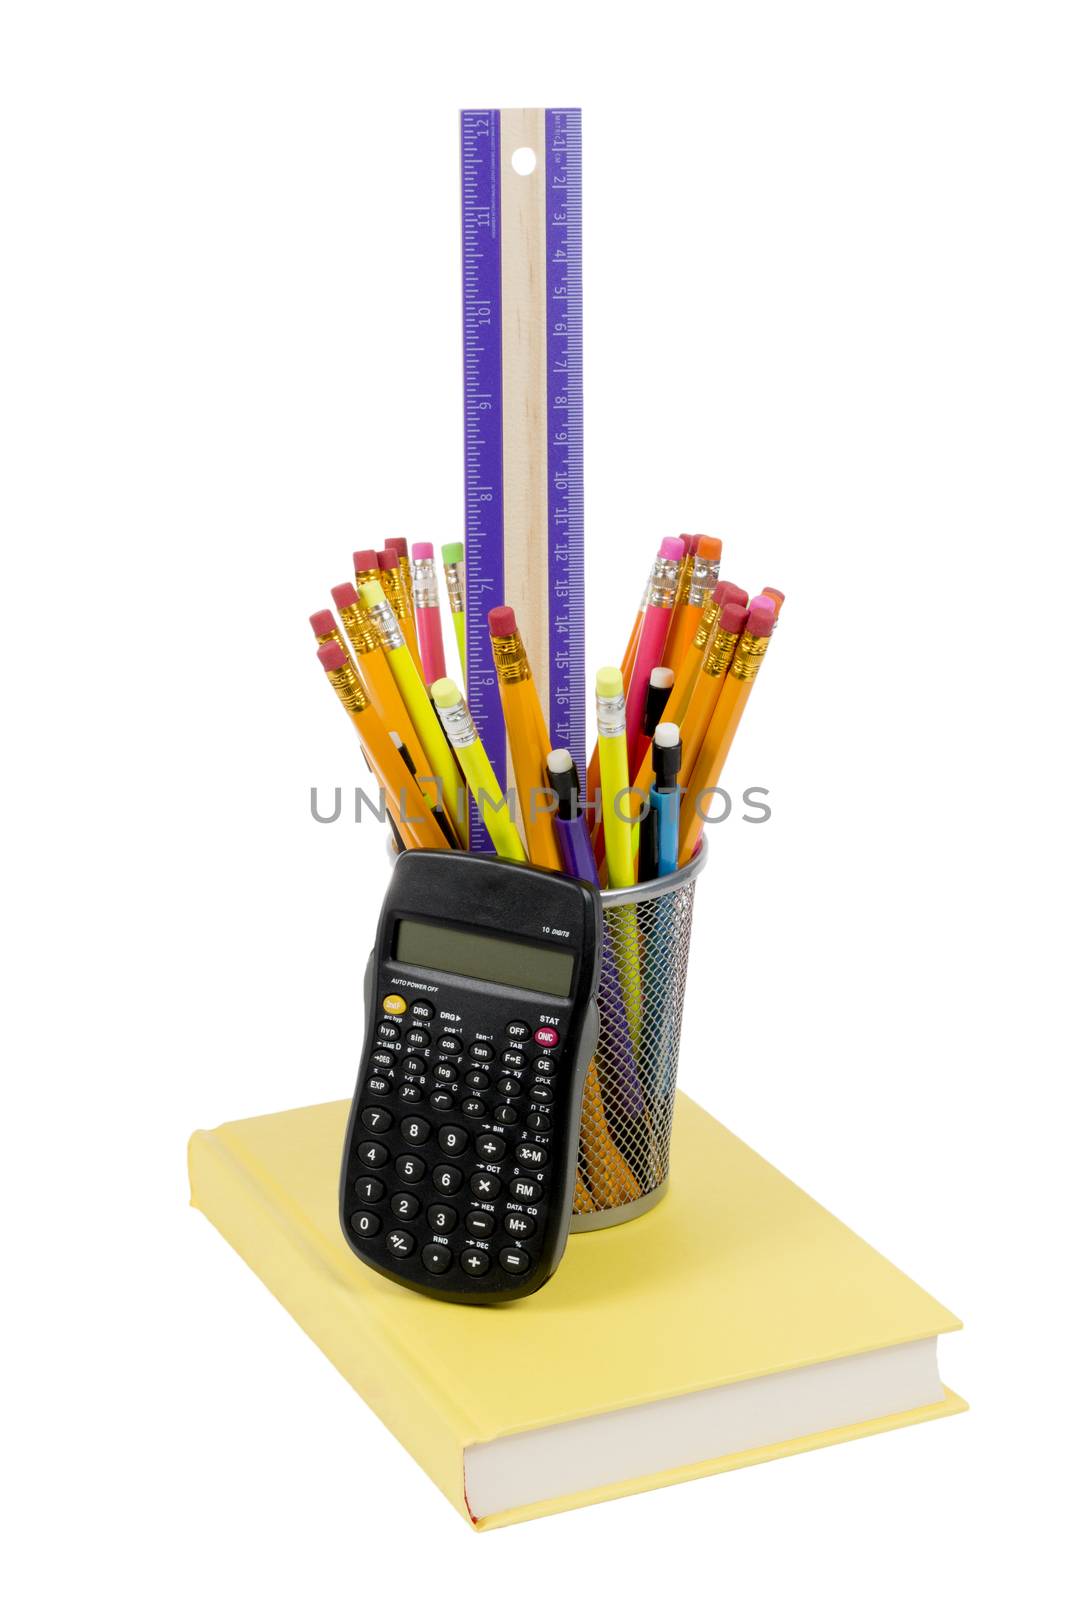 Yellow Book with Calculator and Pencils by stockbuster1